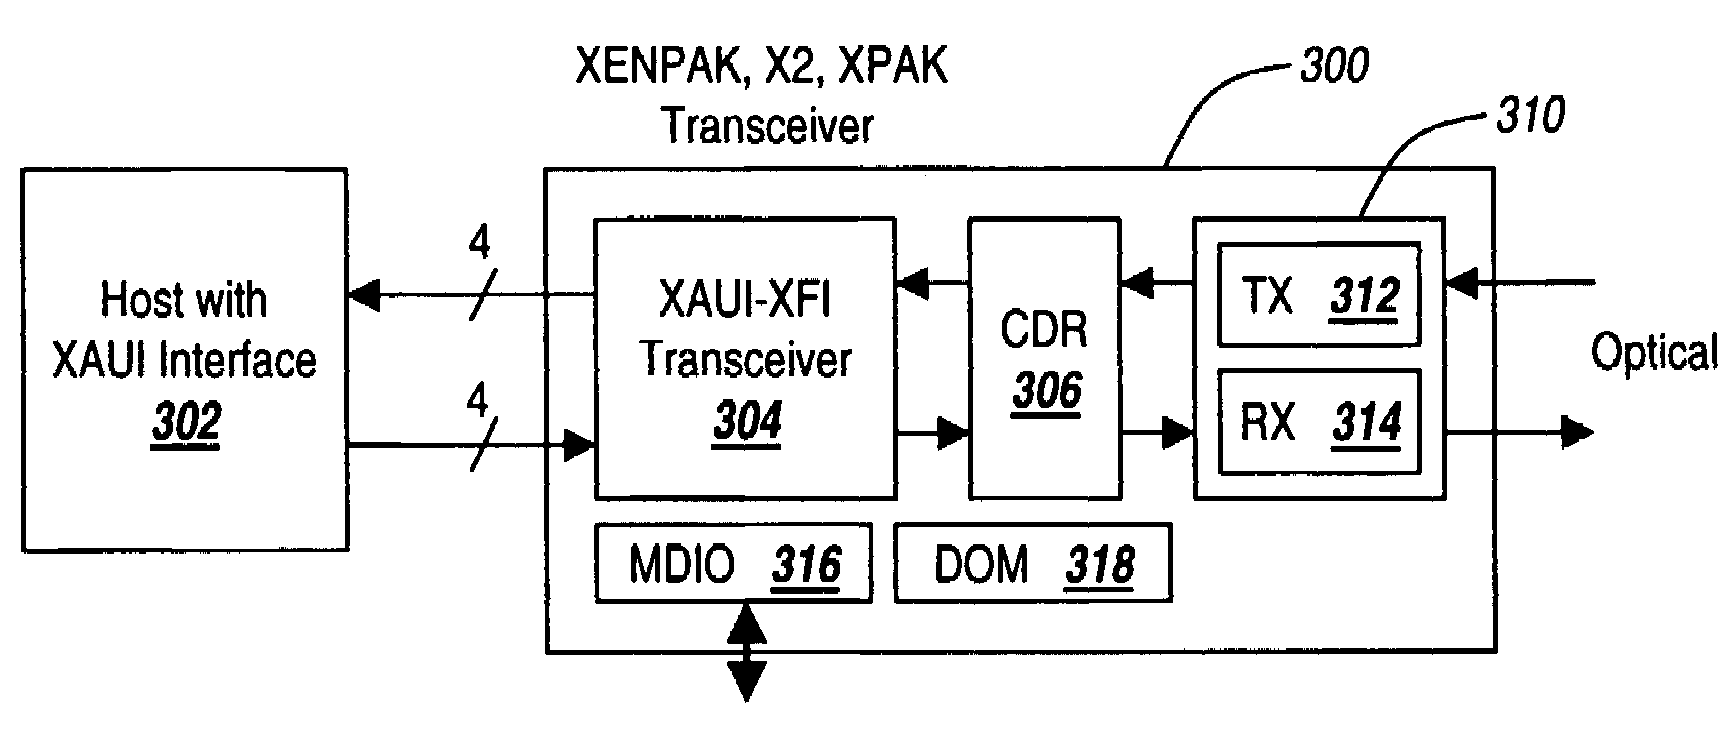 Systems and methods for the integration of framing, OAM&P, and forward error correction in pluggable optical transceiver devices